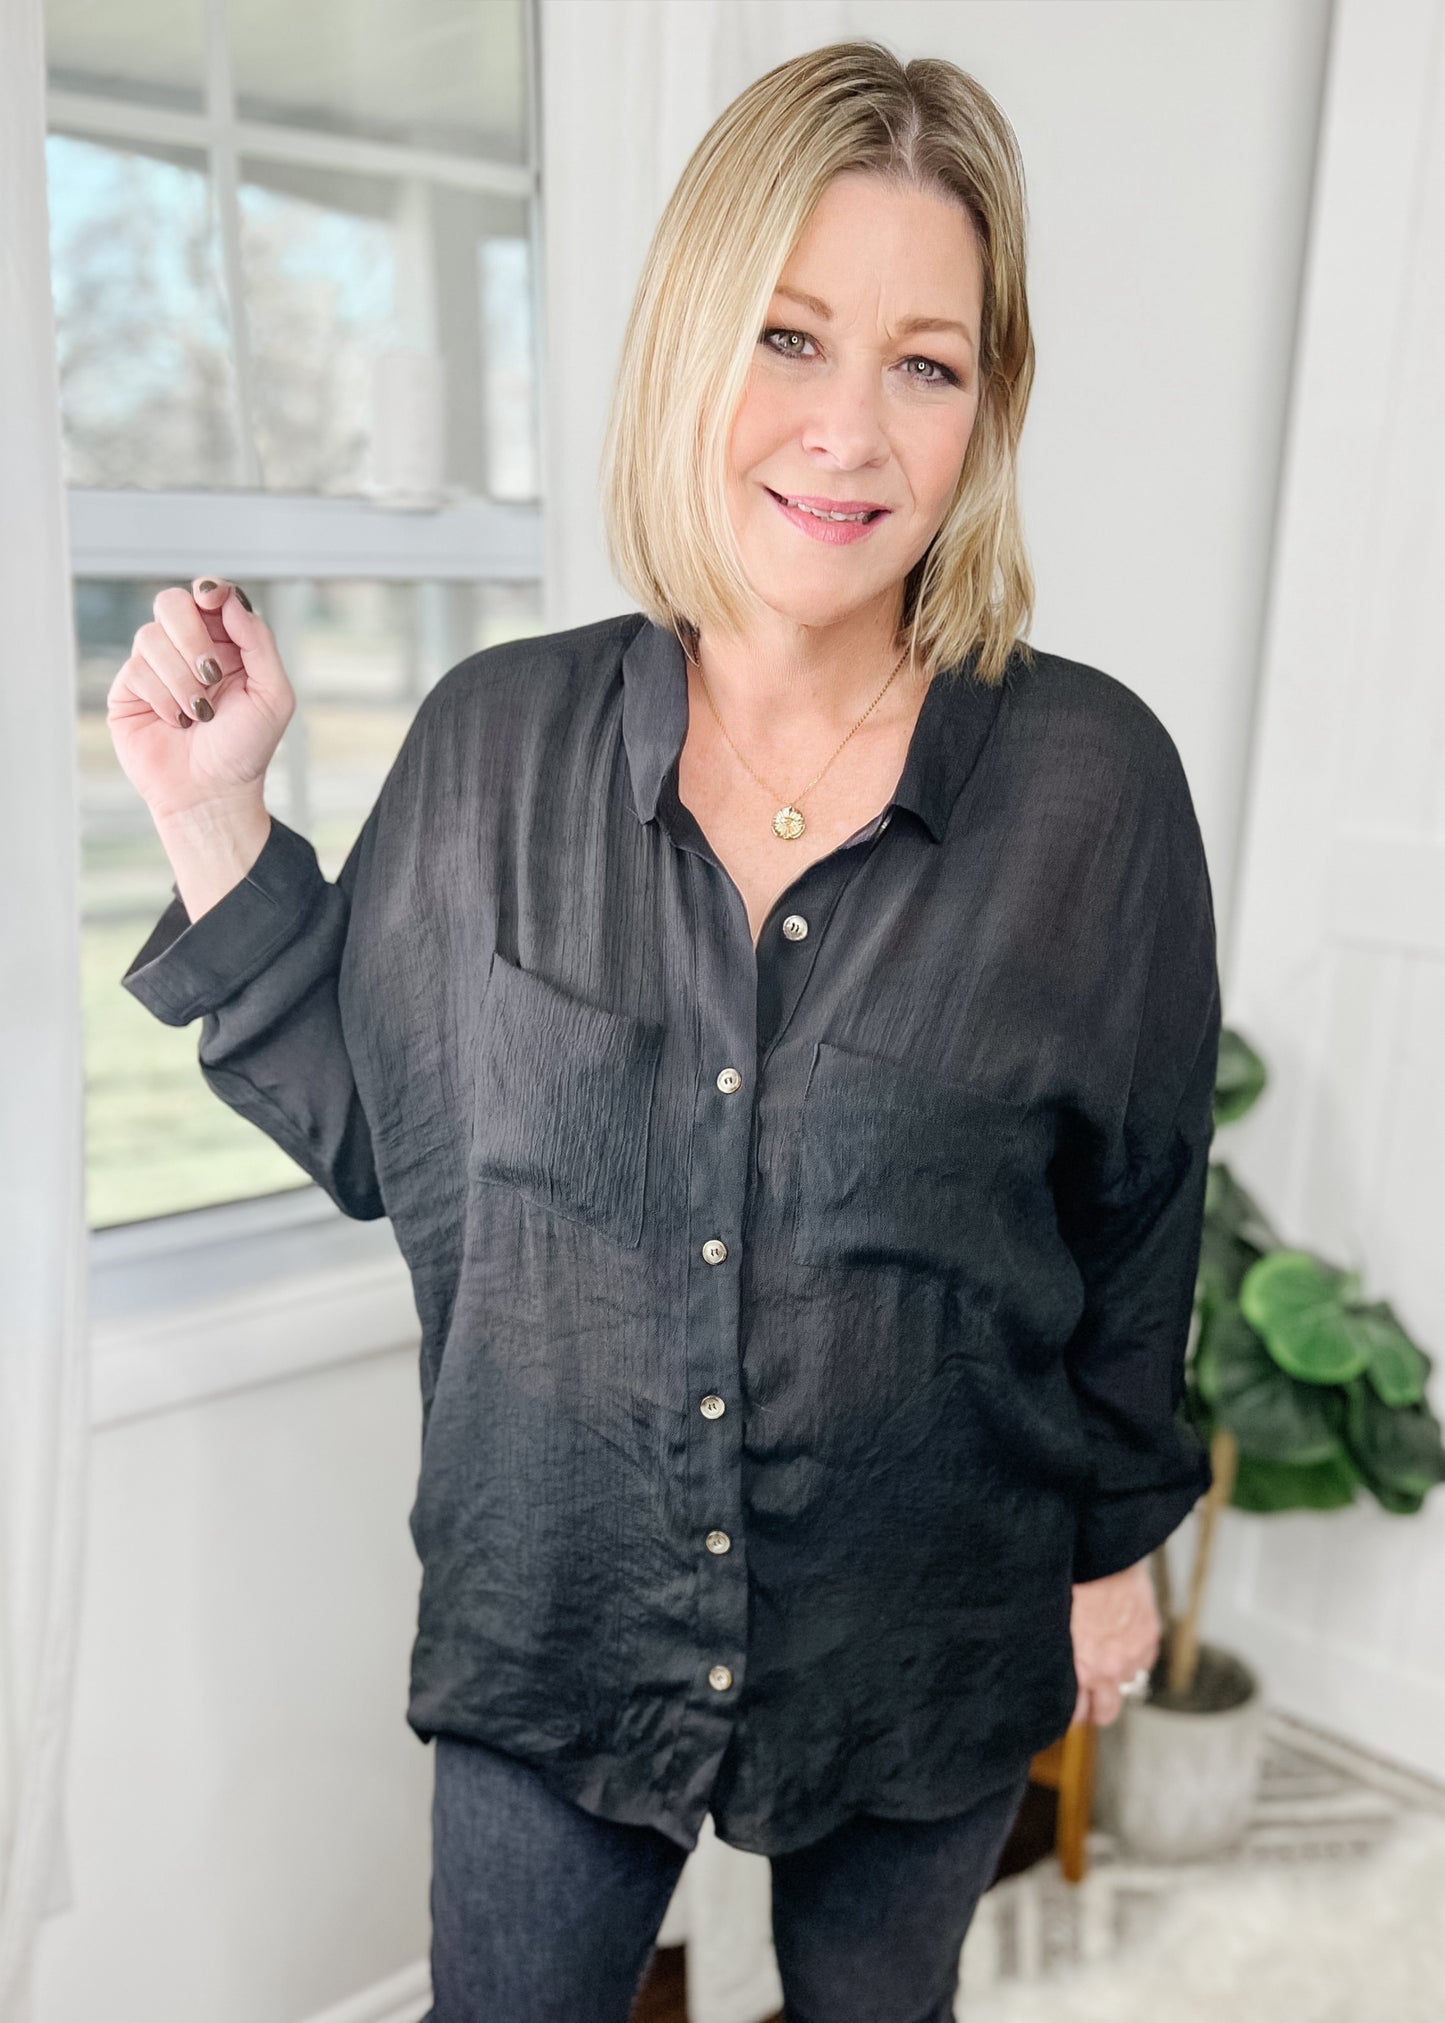 Black semi sheer button down with front breast pockets, collar, and sleeve strap to roll sleeves.  